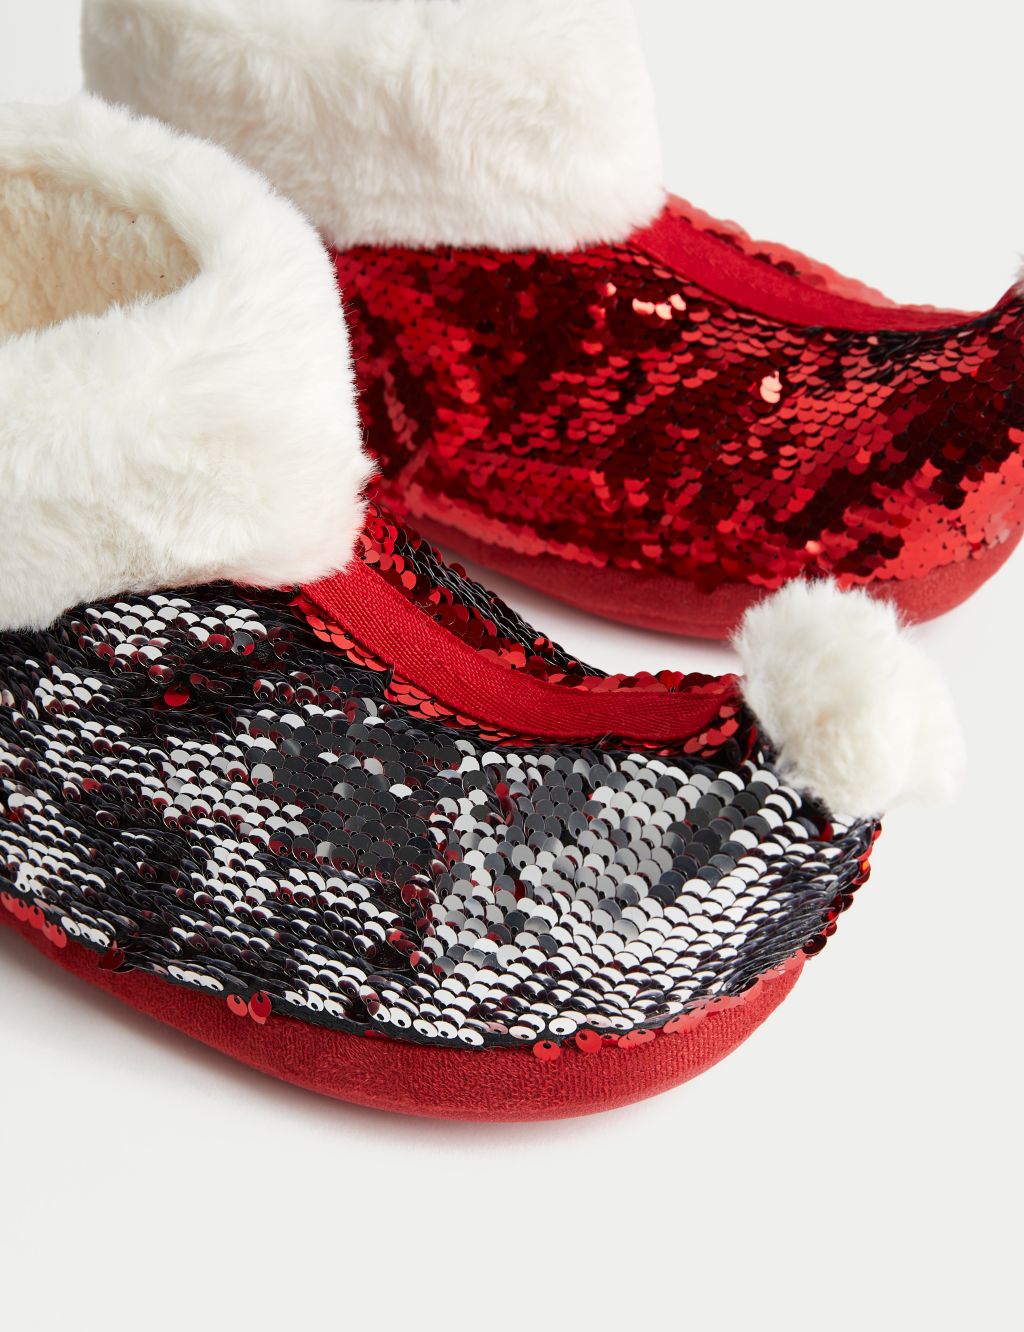 Kids' Christmas Sequin Slipper Boots (13 Small - 6 Large) image 4